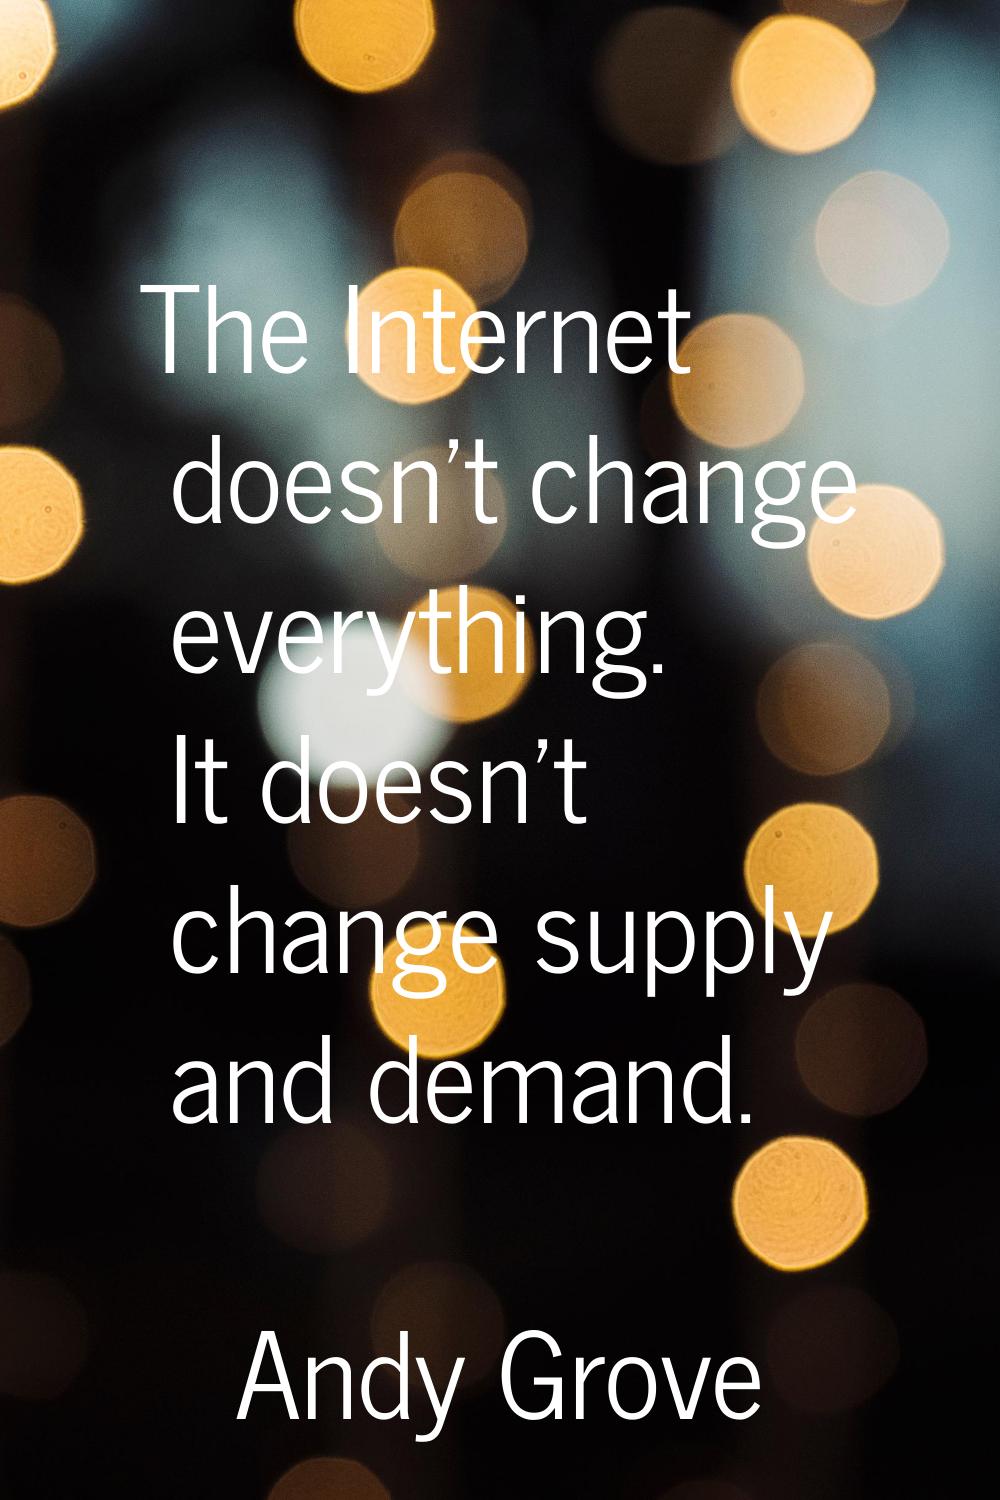 The Internet doesn't change everything. It doesn't change supply and demand.